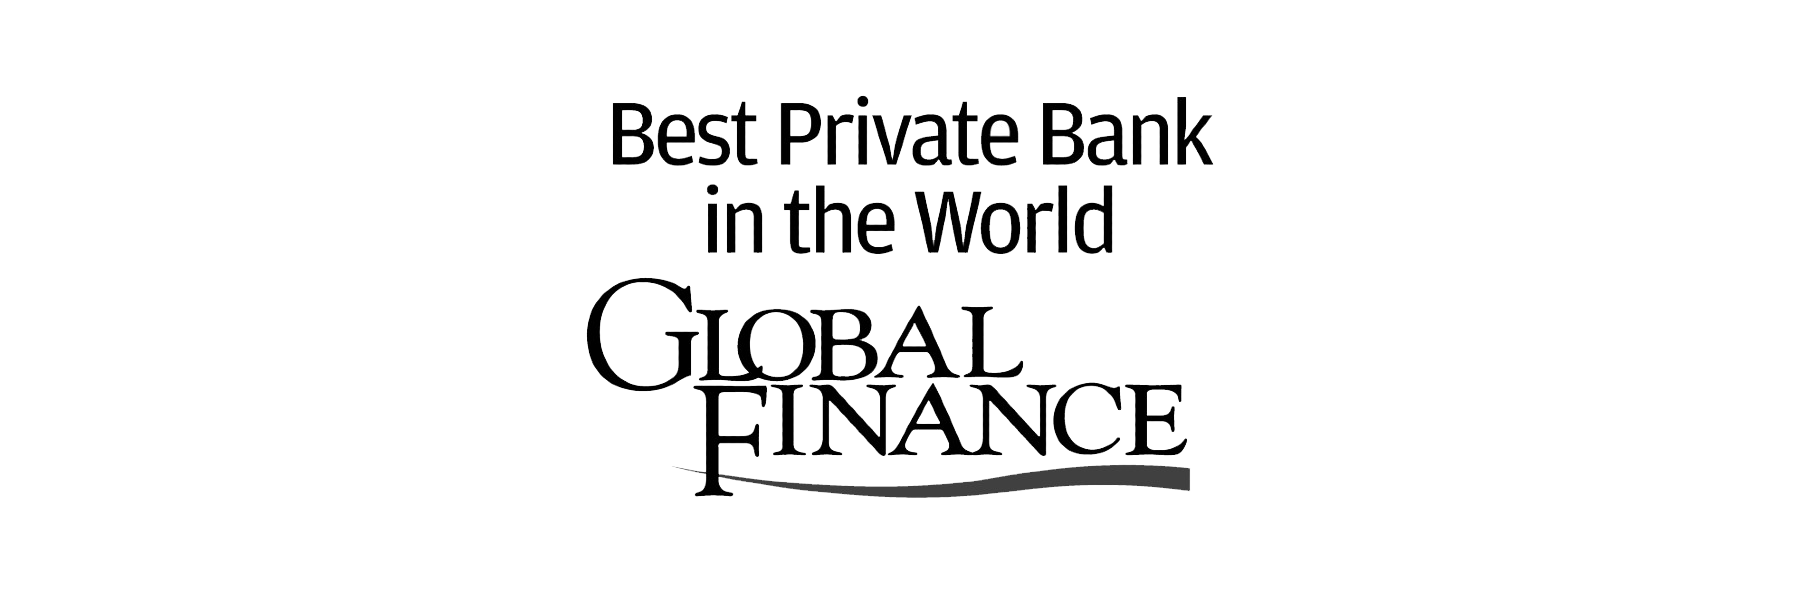 Best Private Bank in the World Global Finance